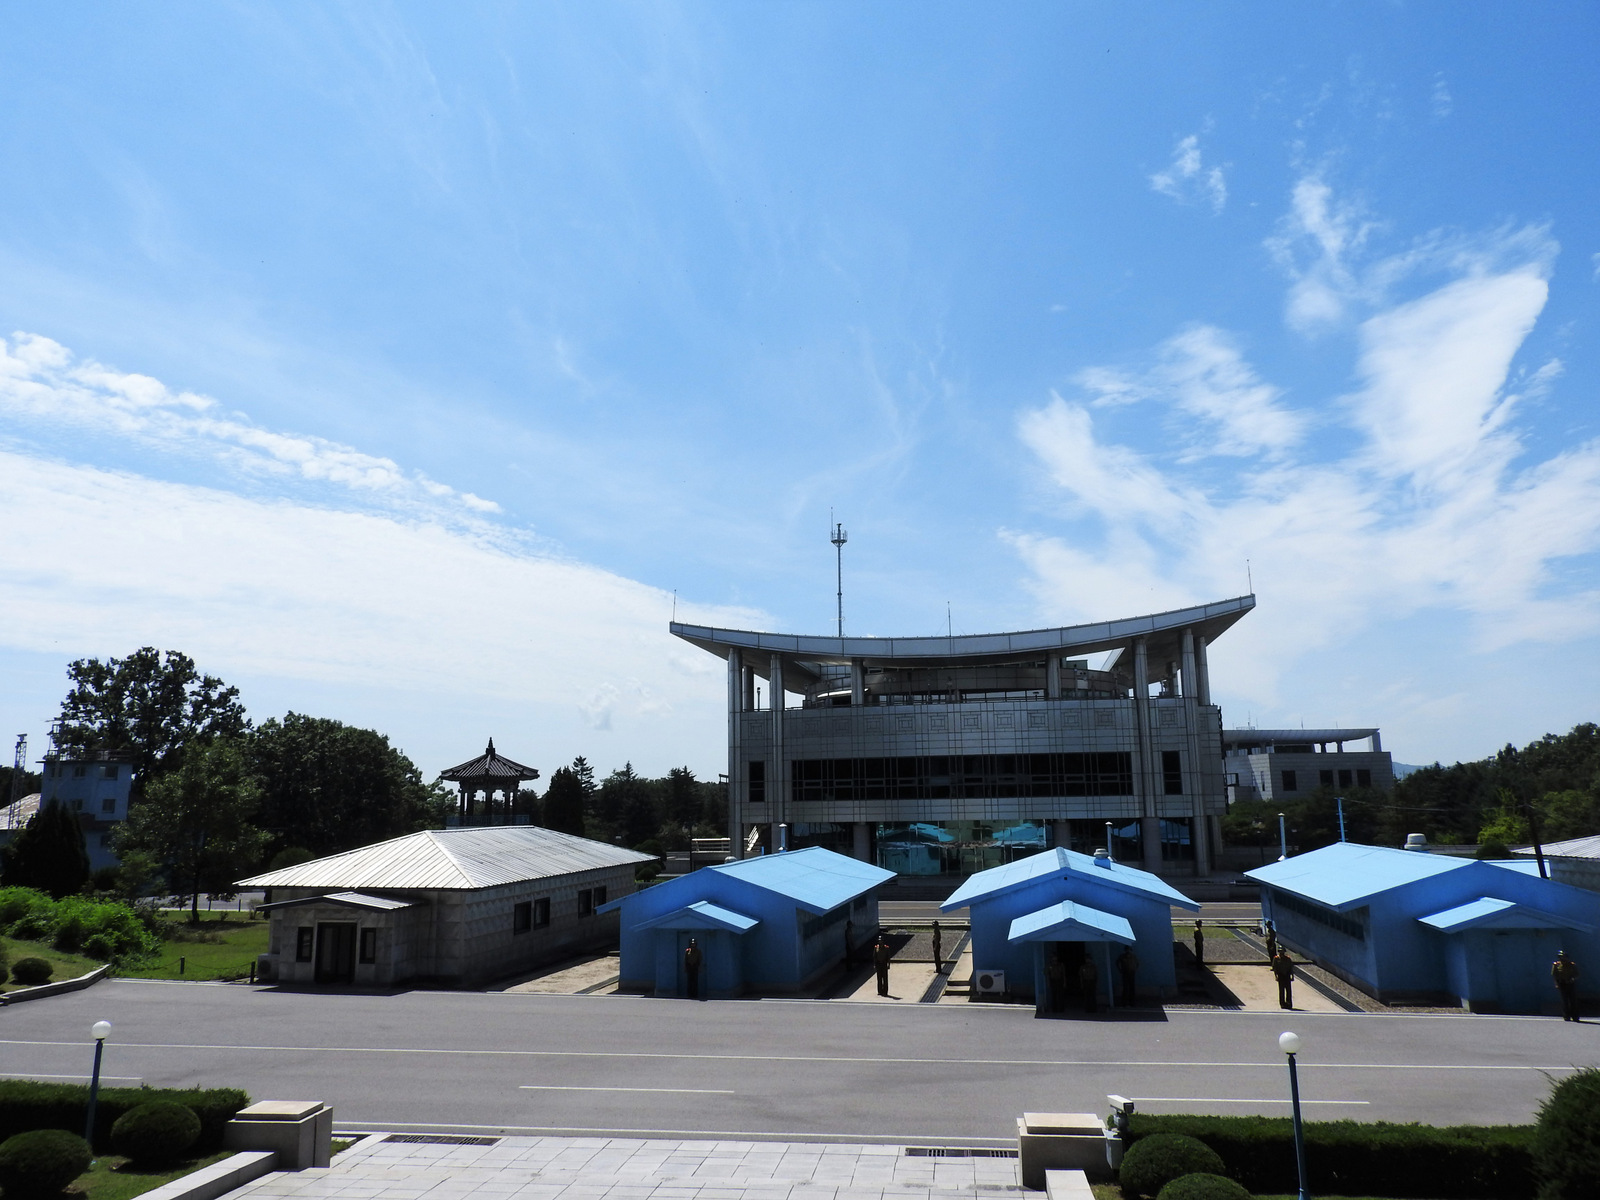 At Panmunjom, near the Demilitarized Zone (DMZ), one learns the North Korean side of history, including the over 8,400 ceasefire violations by the United States. One of many notable such violations was the espionage vessel, the USS Pueblo, now on display outside Pyongyang's war museum. North Koreans on several occasions proposed to have peace treaty talks, with “no positive response from the U.S. side.”